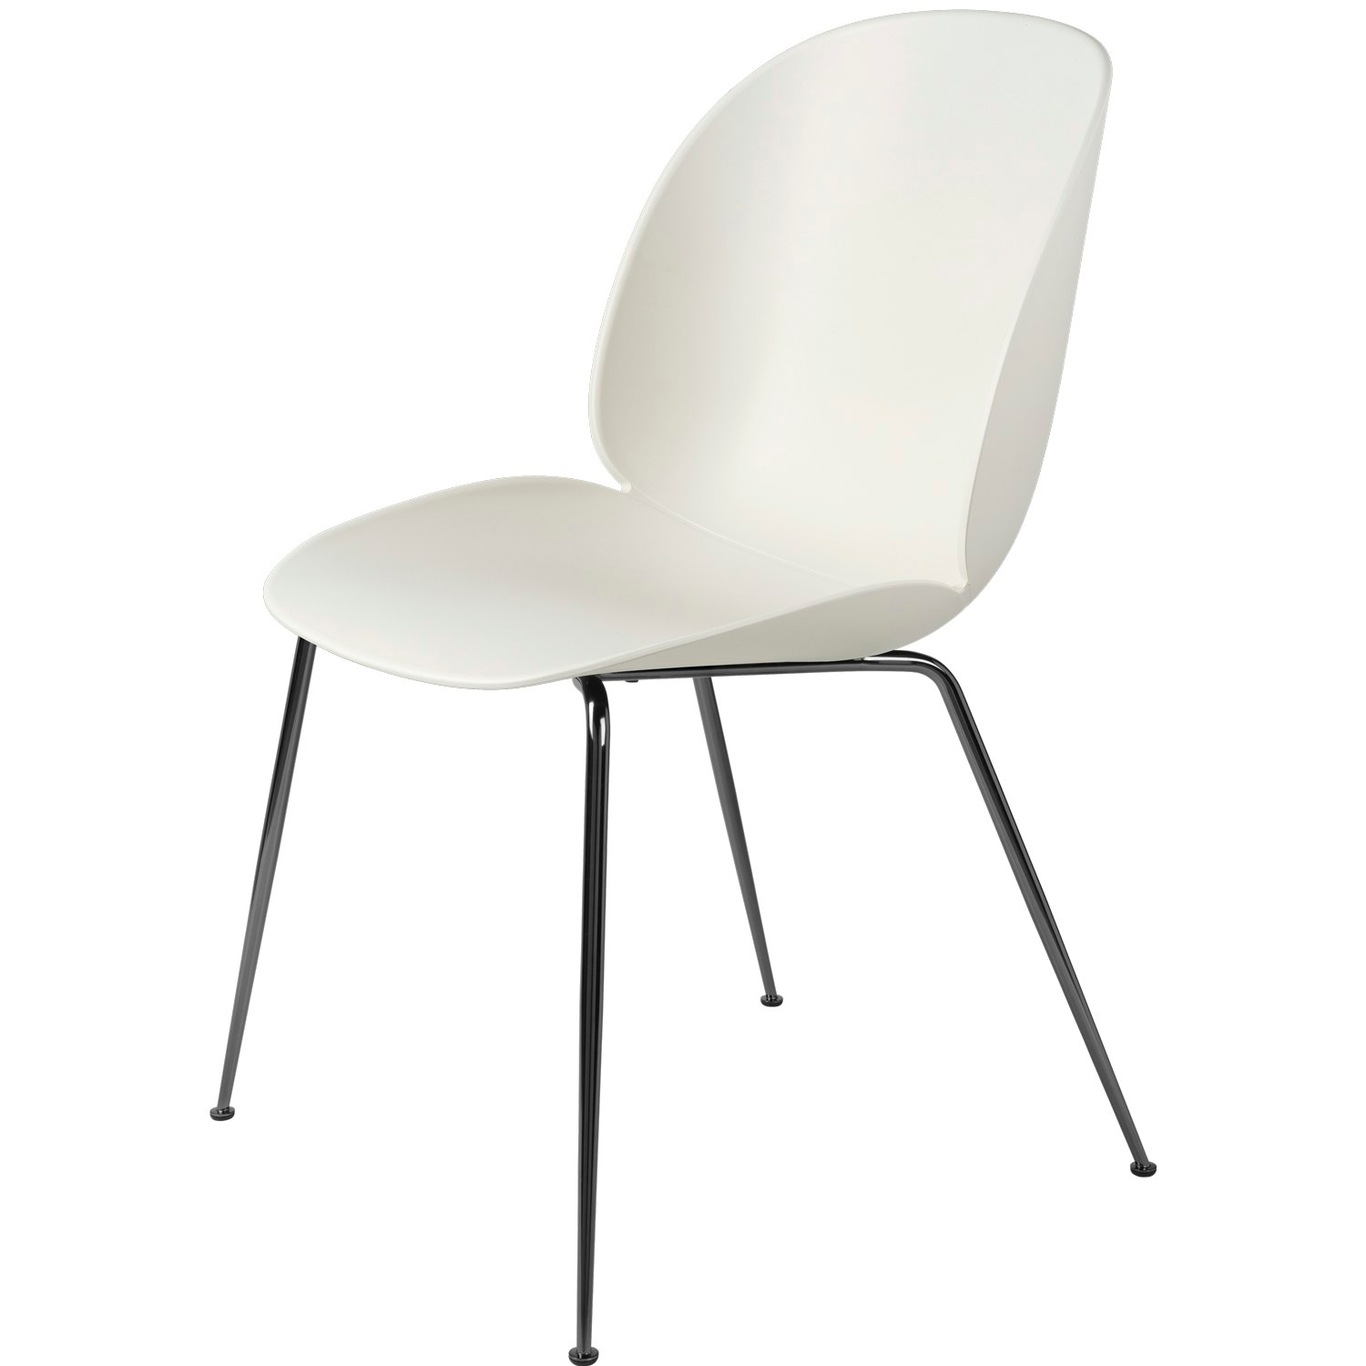 Beetle Dining Chair Unupholstered, Conic Base Black Chromed, Alabaster Wh